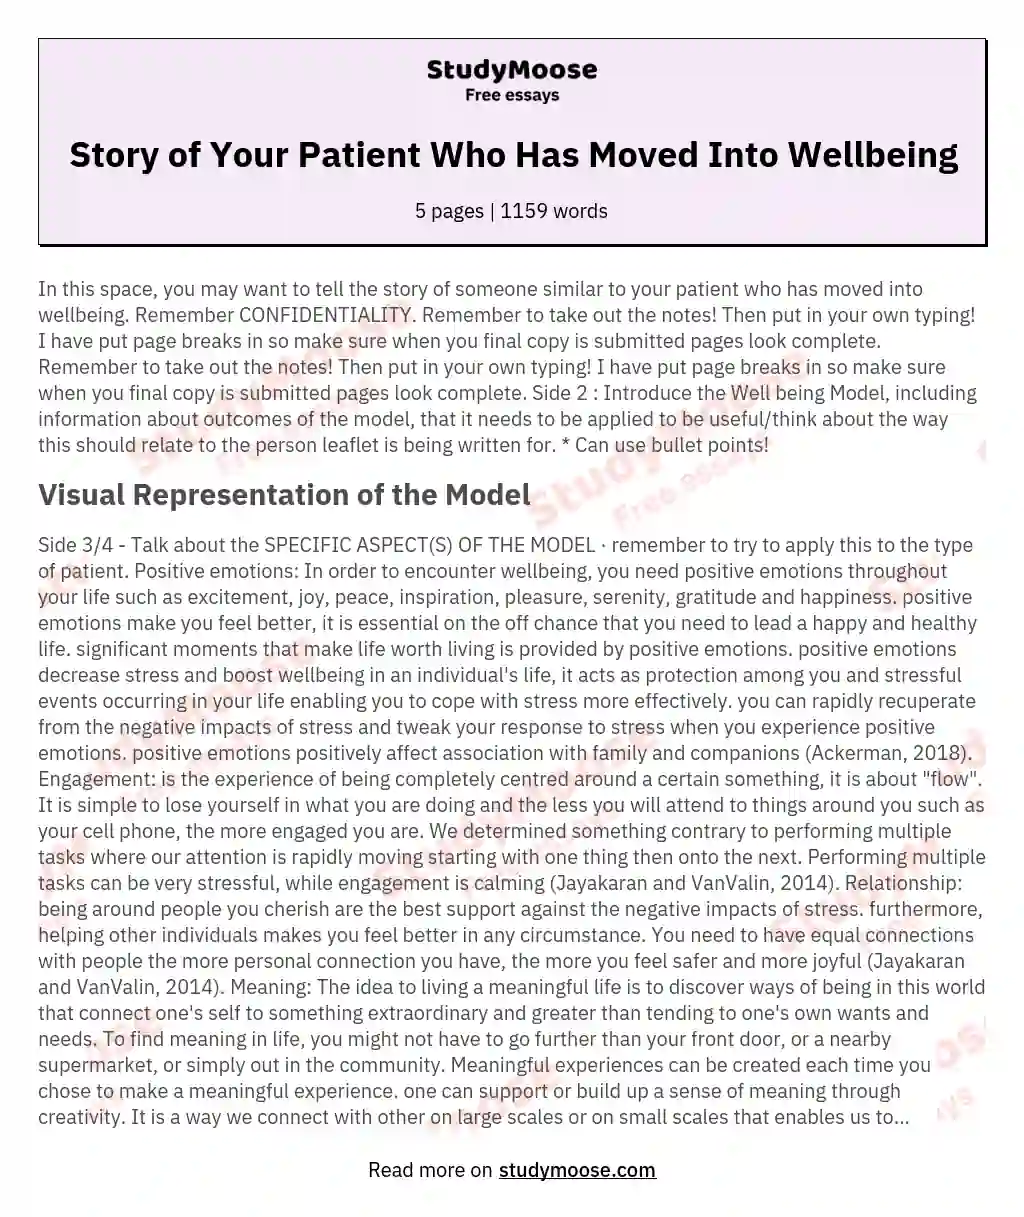 Story of Your Patient Who Has Moved Into Wellbeing essay